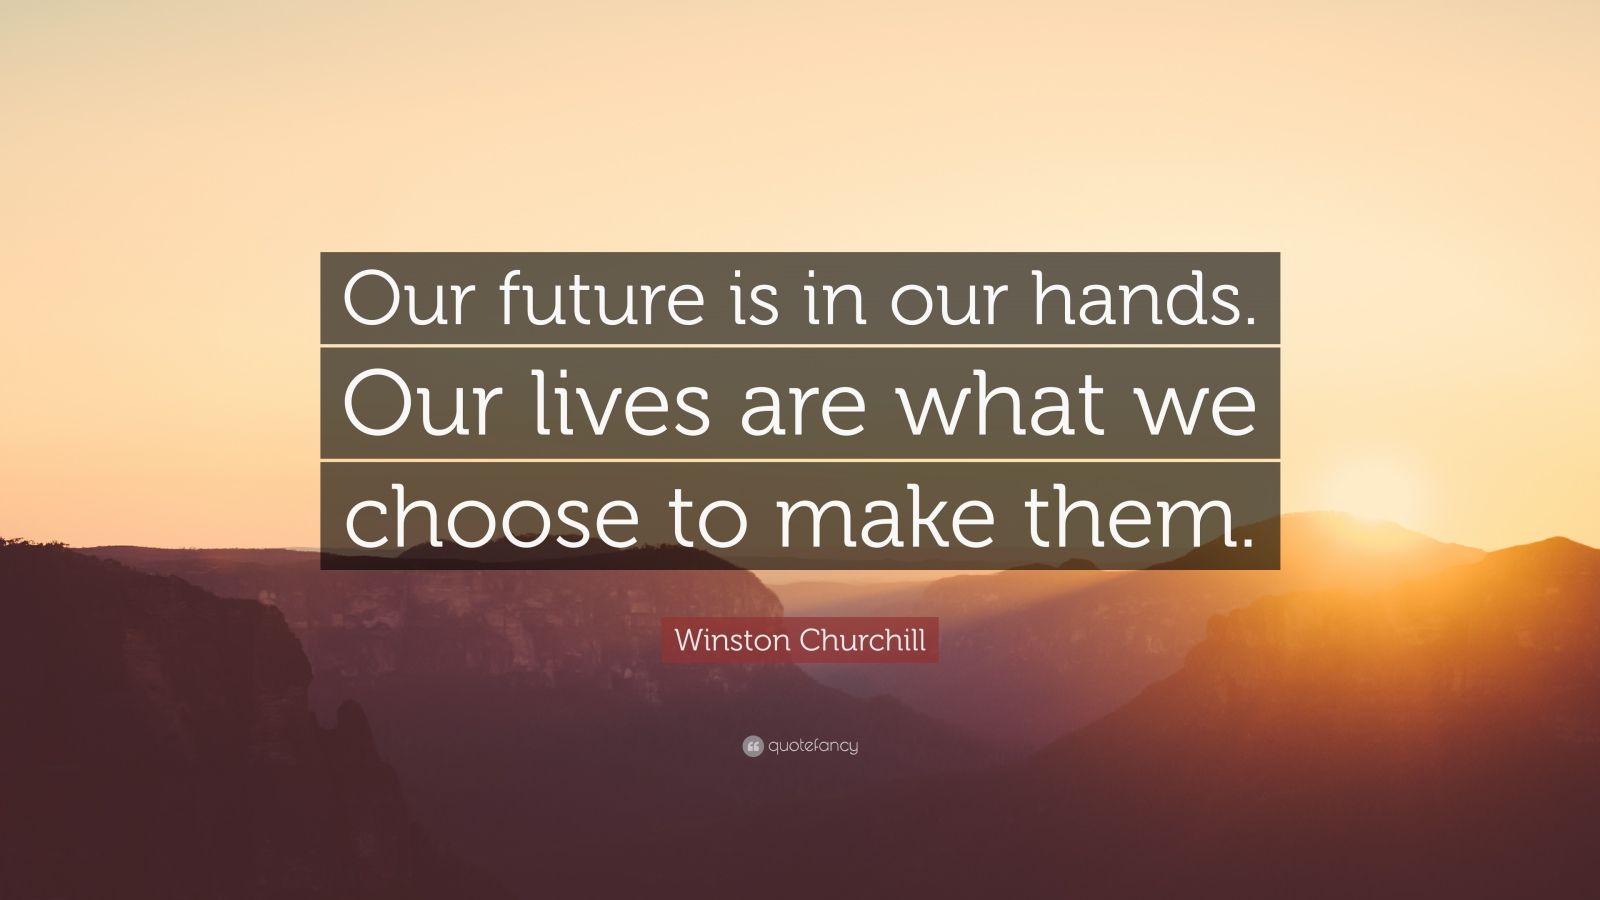 Winston Churchill Quote: “Our future is in our hands. Our lives are